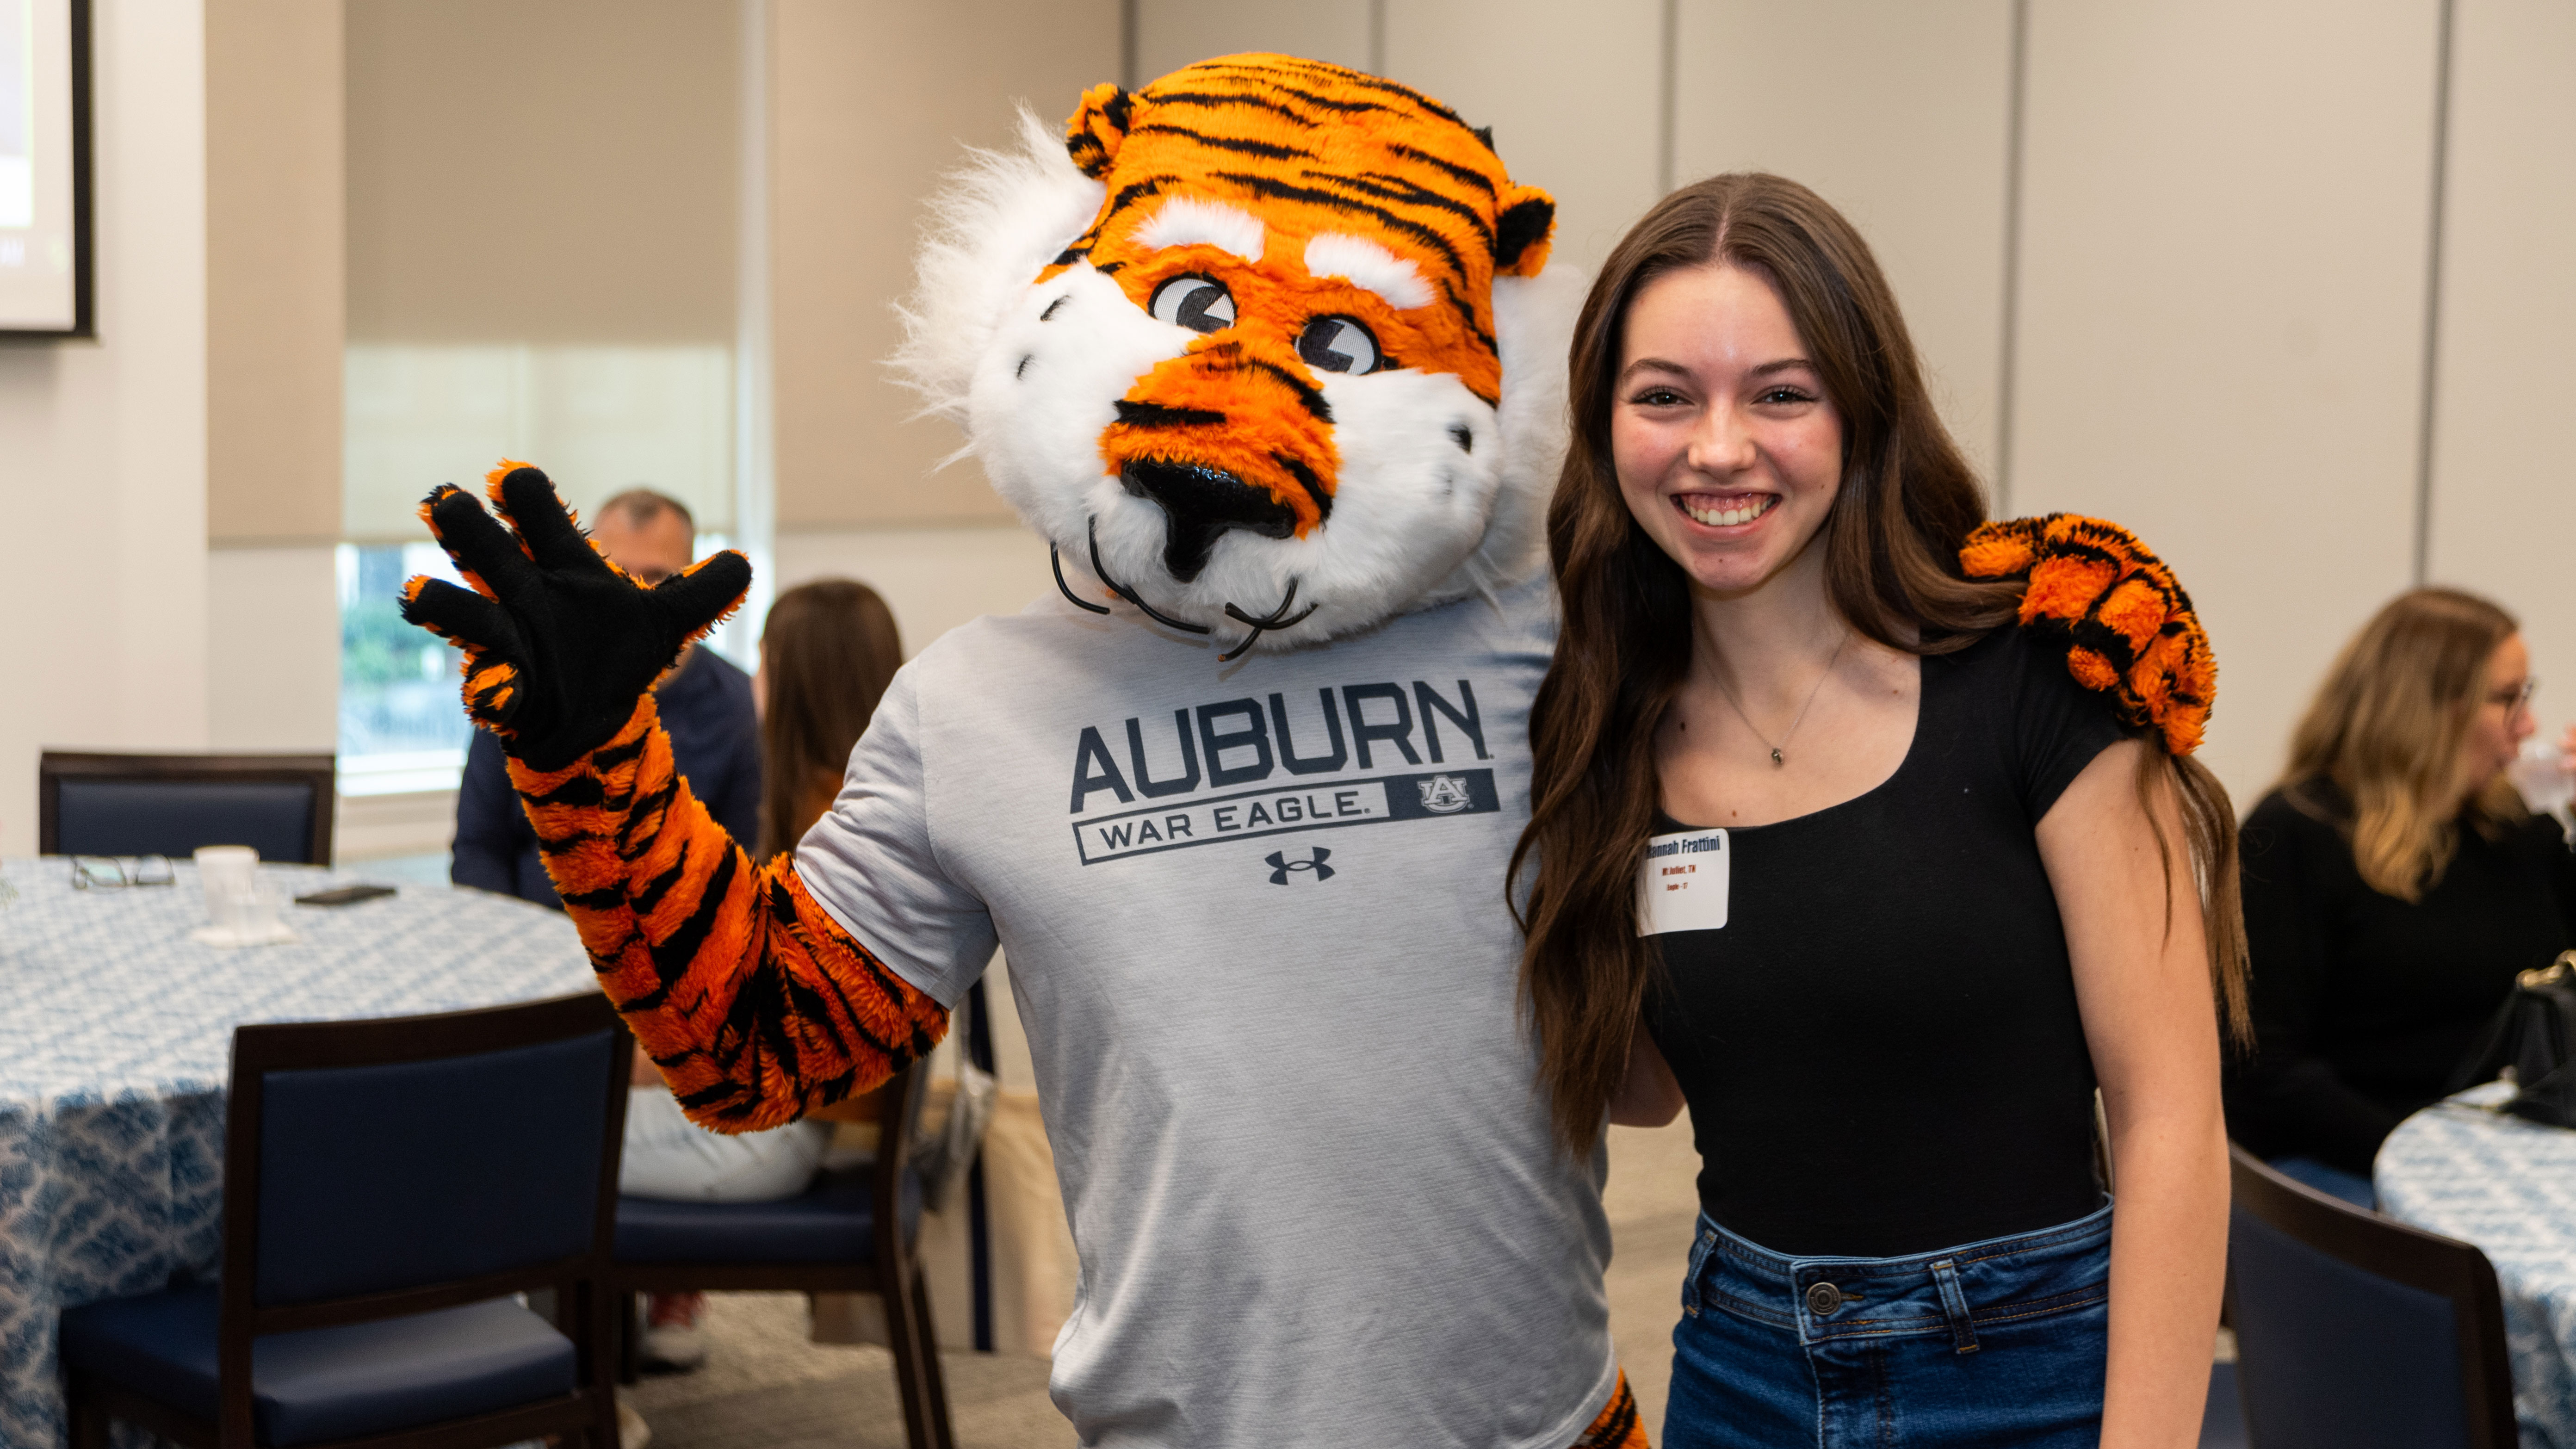 Students and families were treated to presentations in the Brown-Kopel Center followed by a browse session of the various majors offered in the college, a tour of the engineering departments, and lunch.